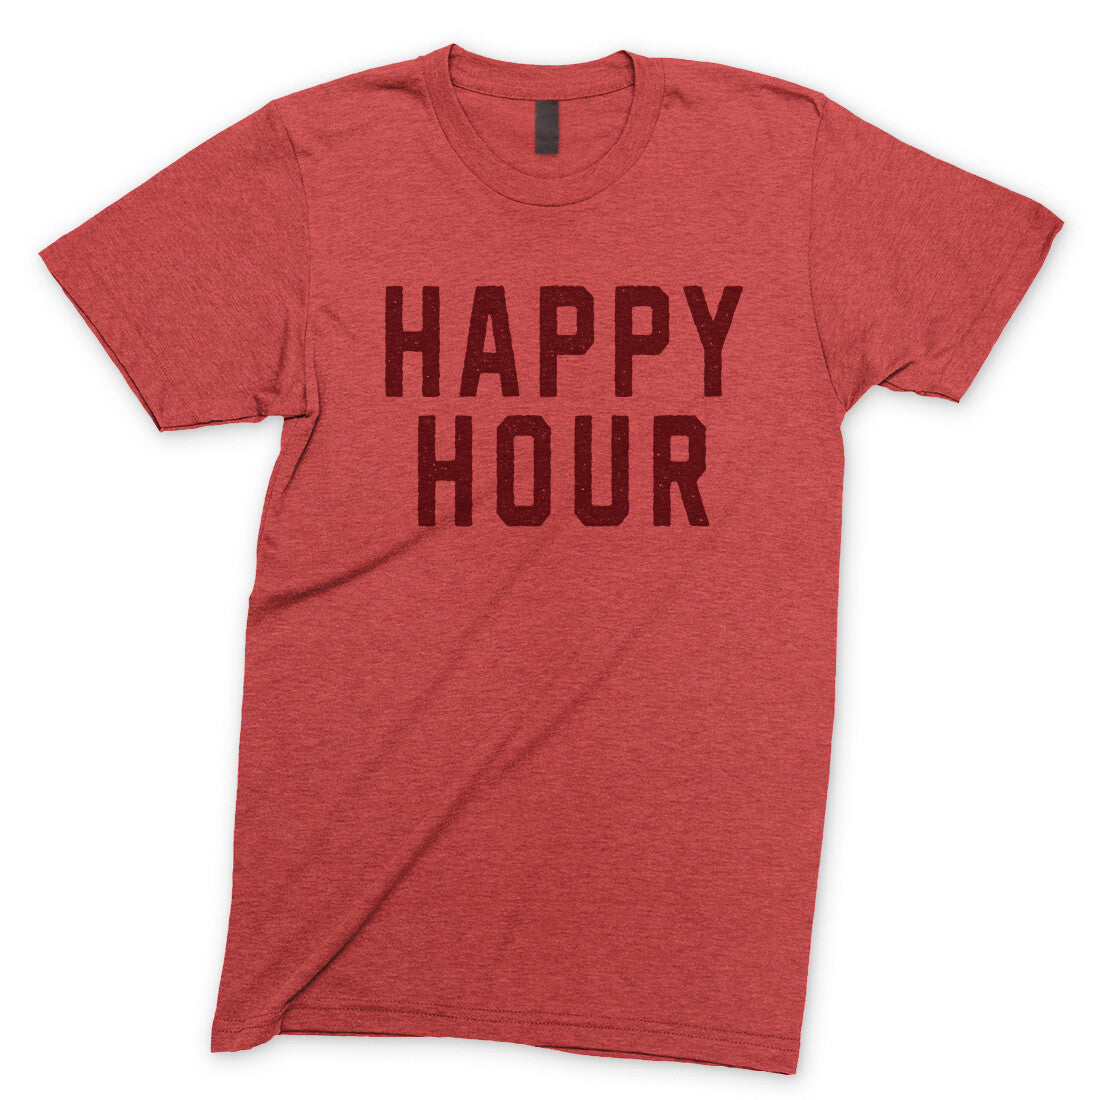 Happy Hour in Heather Red Color